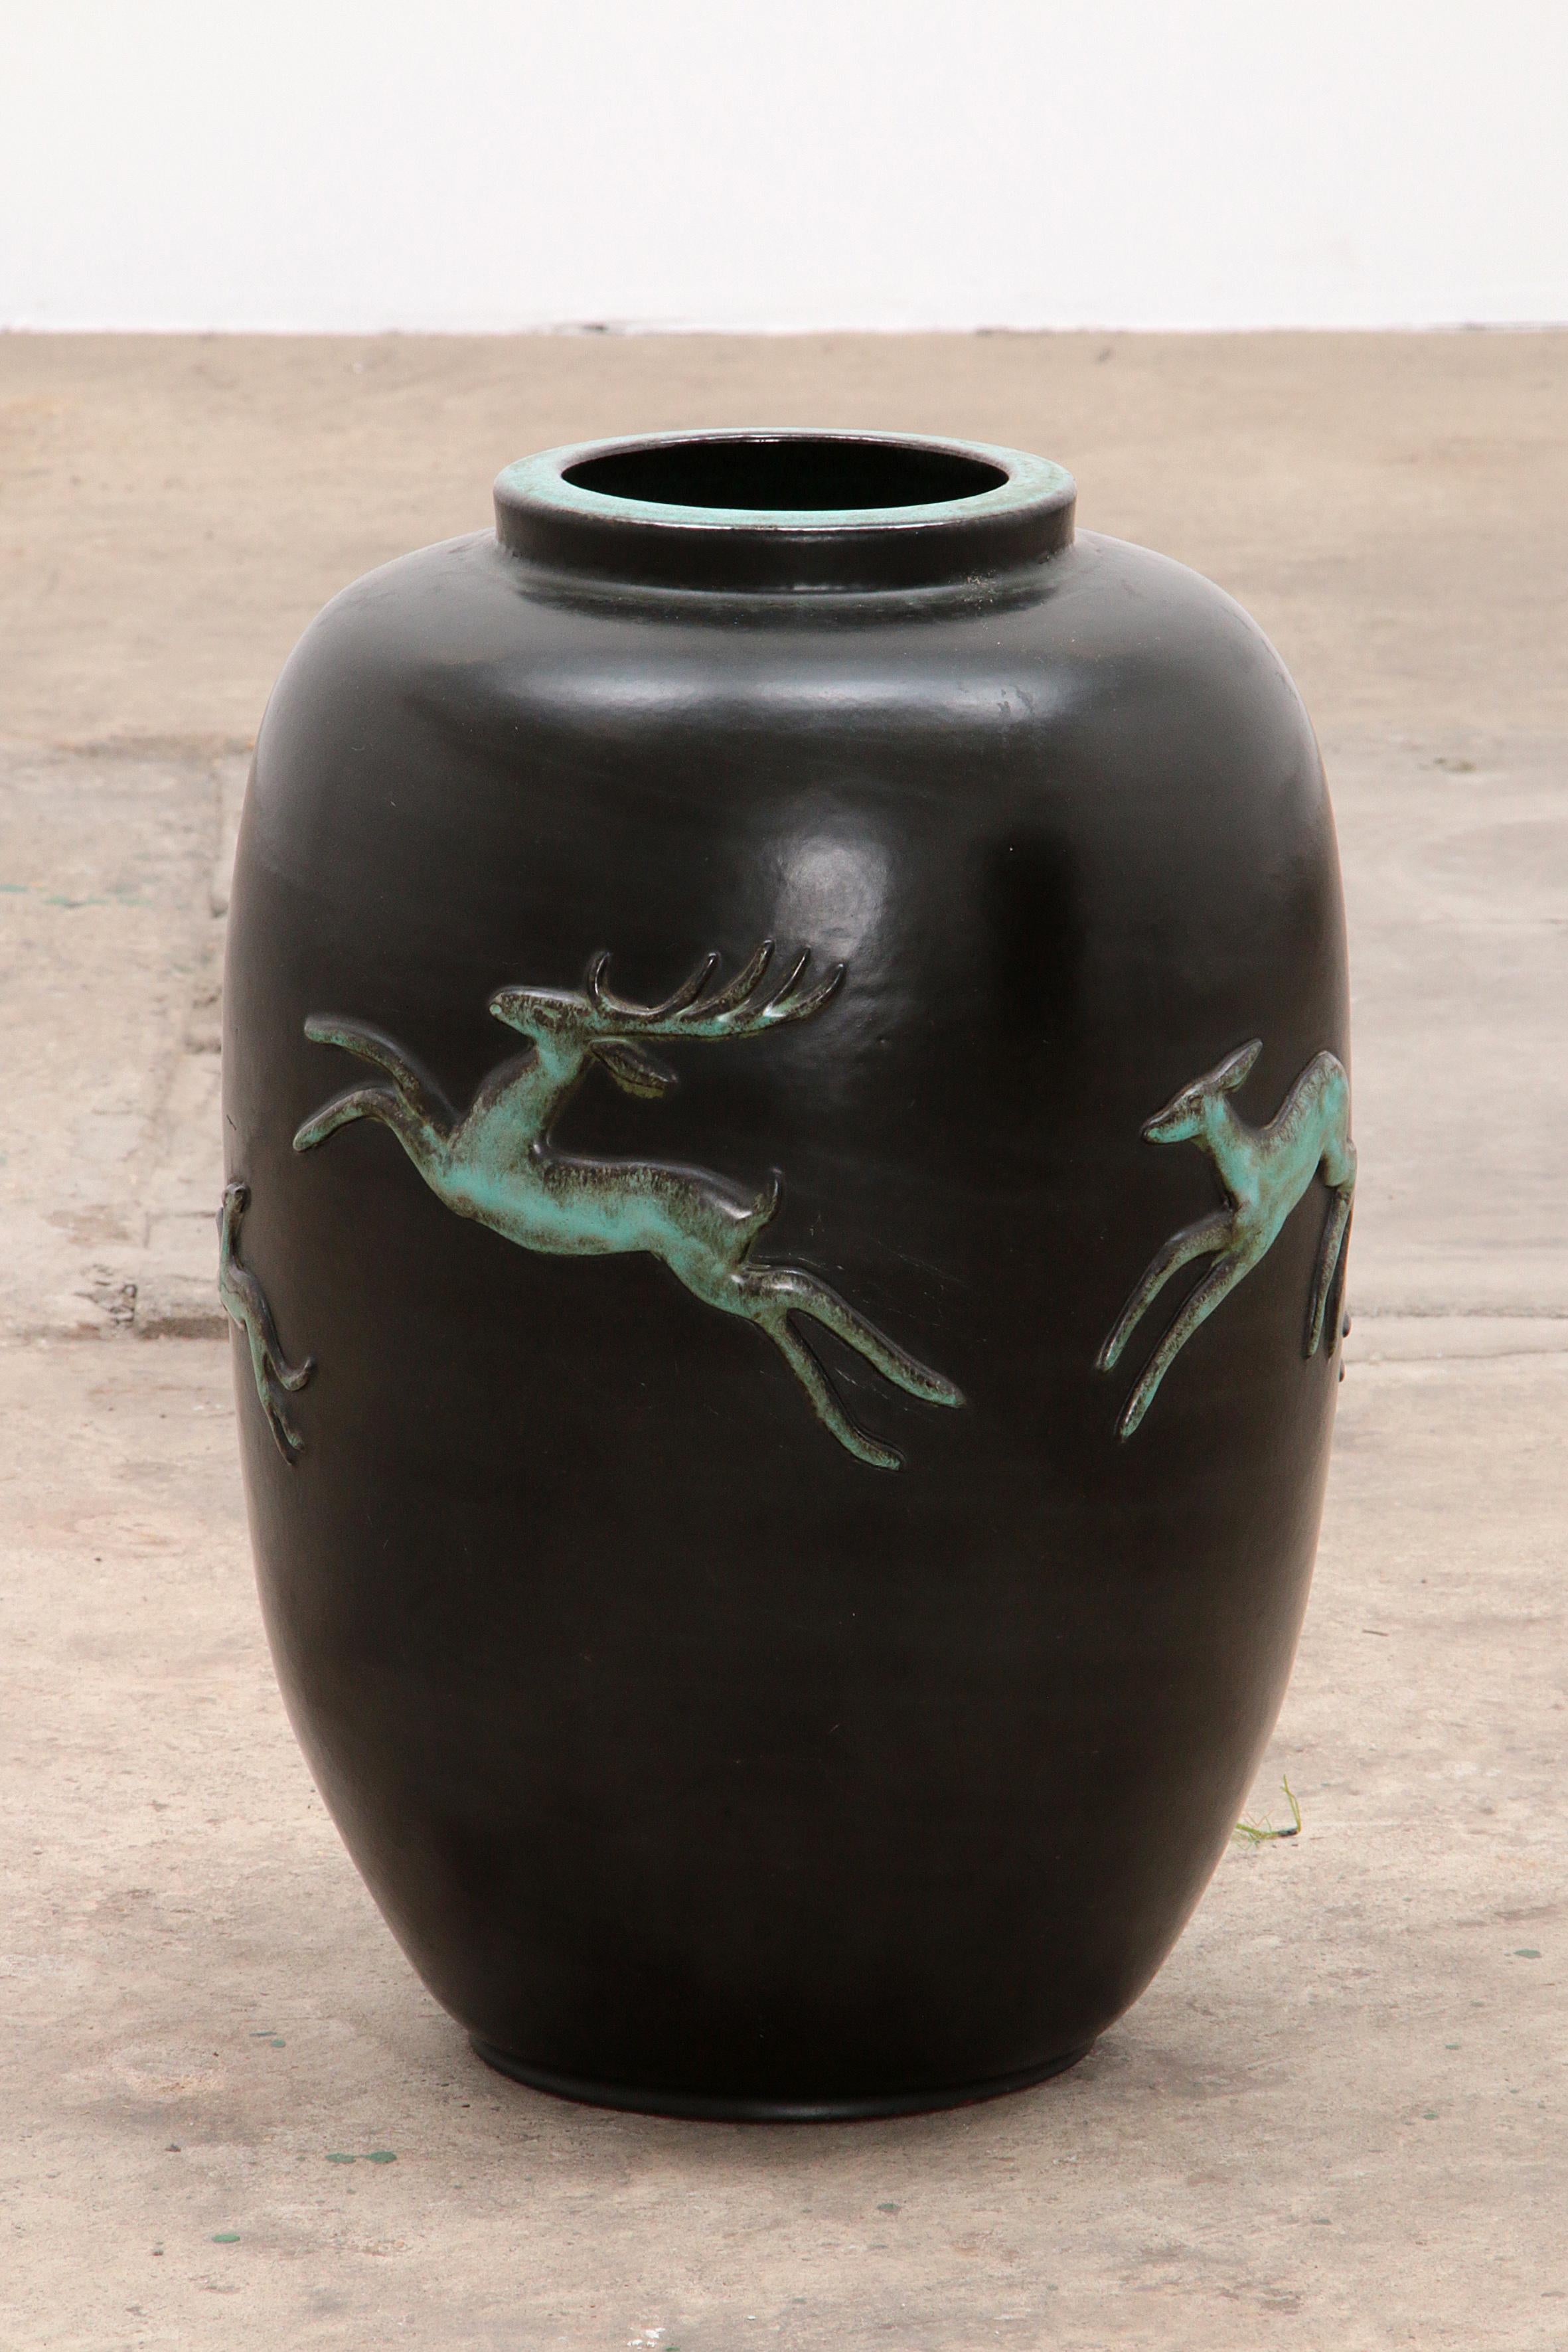 Large glazed black-green terracotta vase from the 1950s with deer in bas-relief made by Ugo Zaccagnini & Son.s. Beautiful, unique piece in very good condition.

This beautiful vase is handmade and glazed with several beautiful jumping deer in a